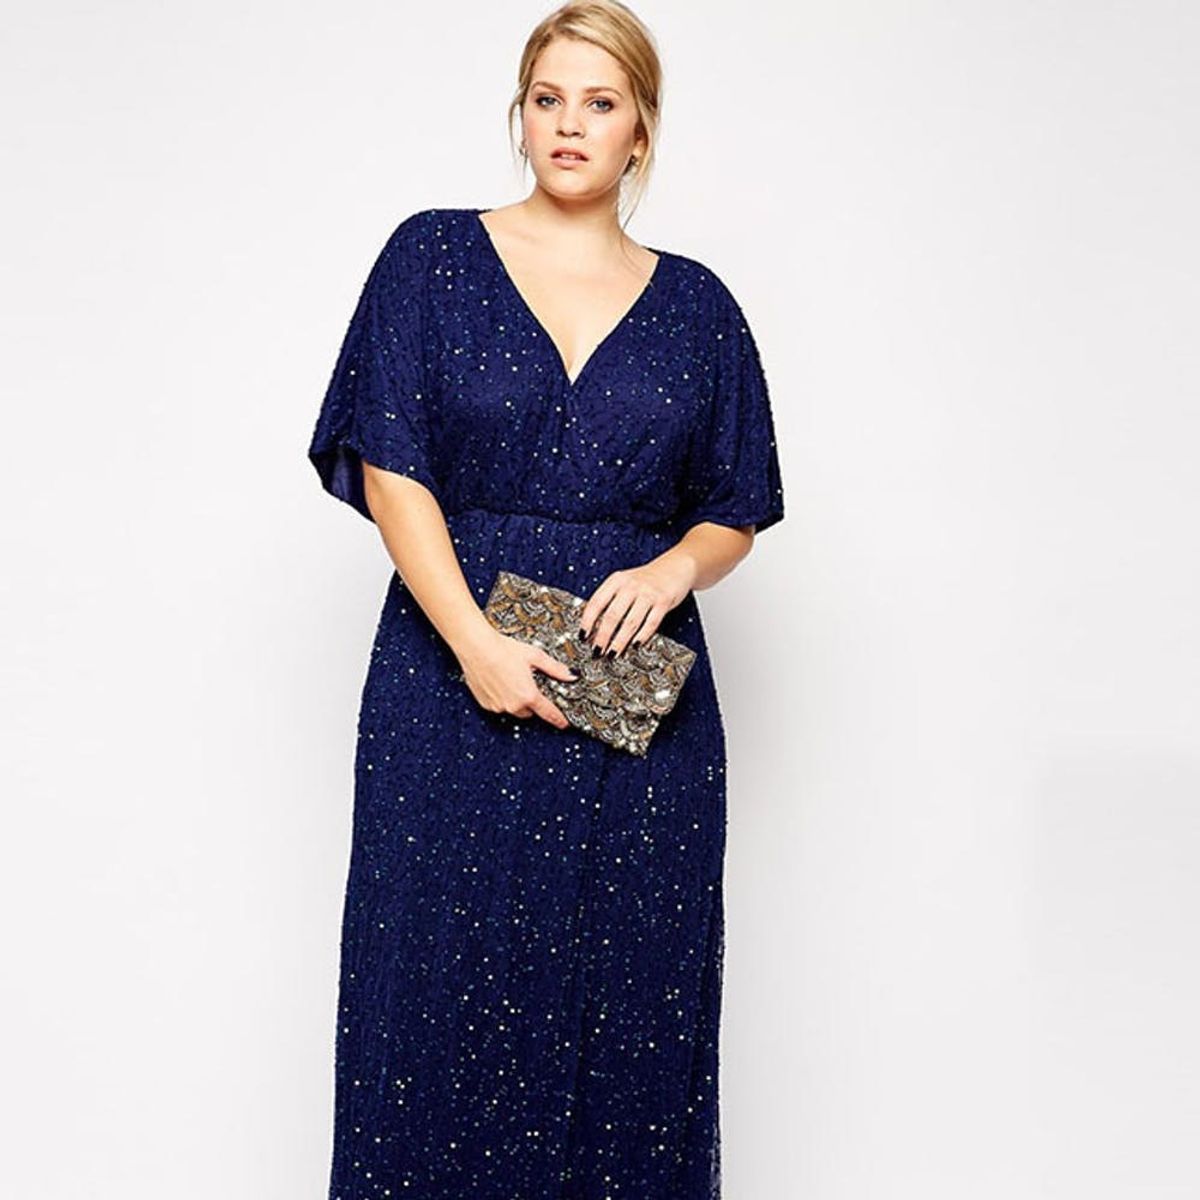 15 Dresses to Wear to a Winter Wedding